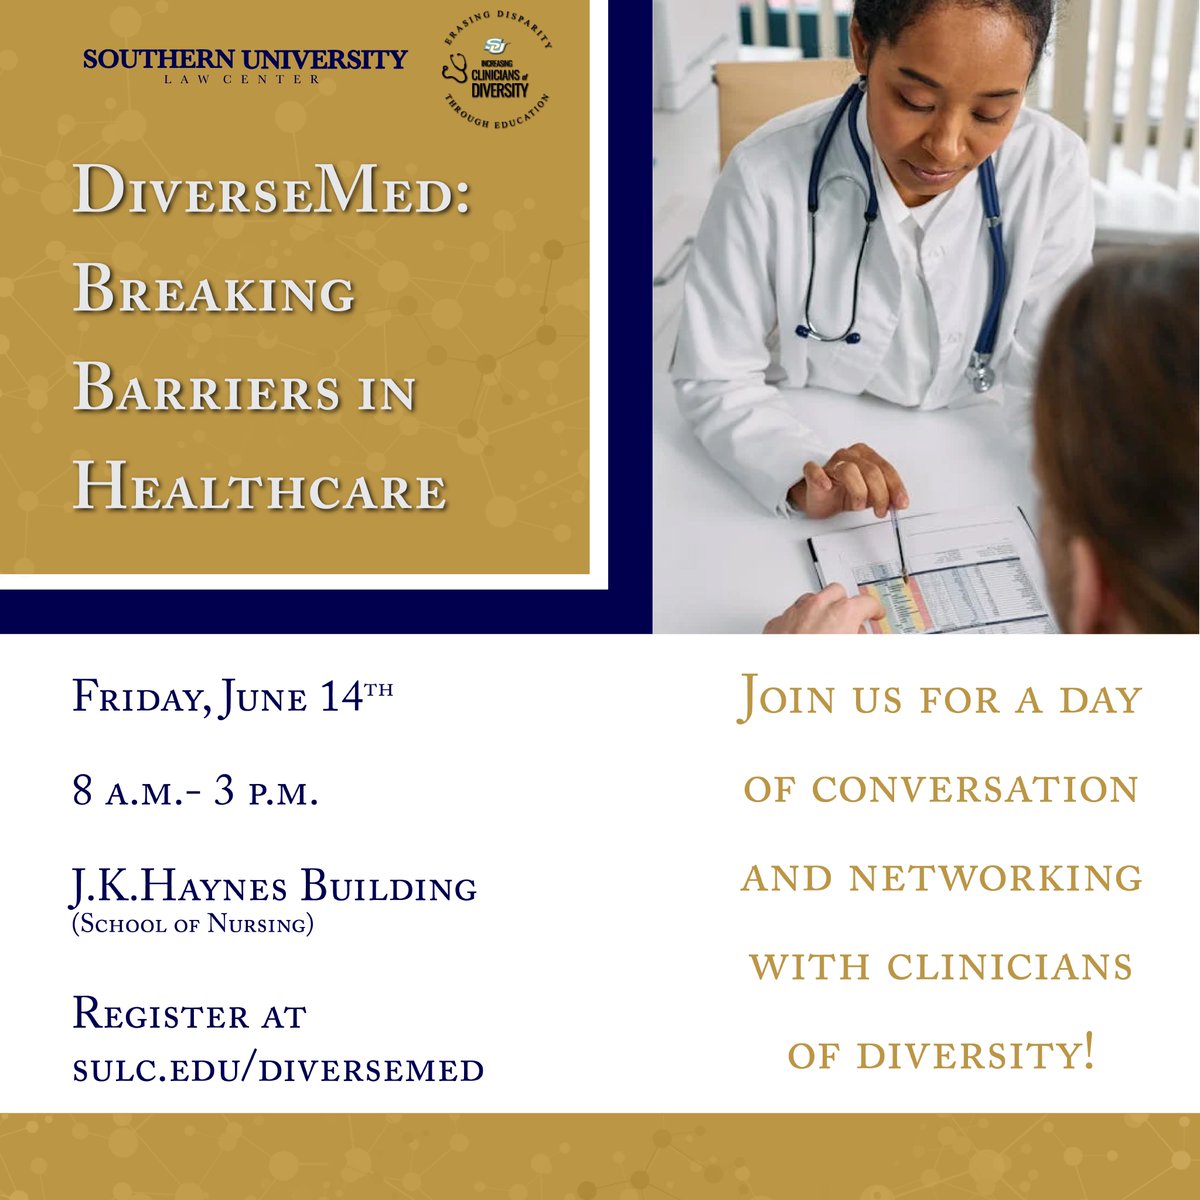 Join us as we break barriers in #healthcare! SUBR’s Increasing Clinicians of Diversity (SU ICOD), along with #SULC, is hosting a day of conversation and networking with clinicians of diversity on Friday, June 14. We hope to see you there! Register at sulc.edu/diversemed.